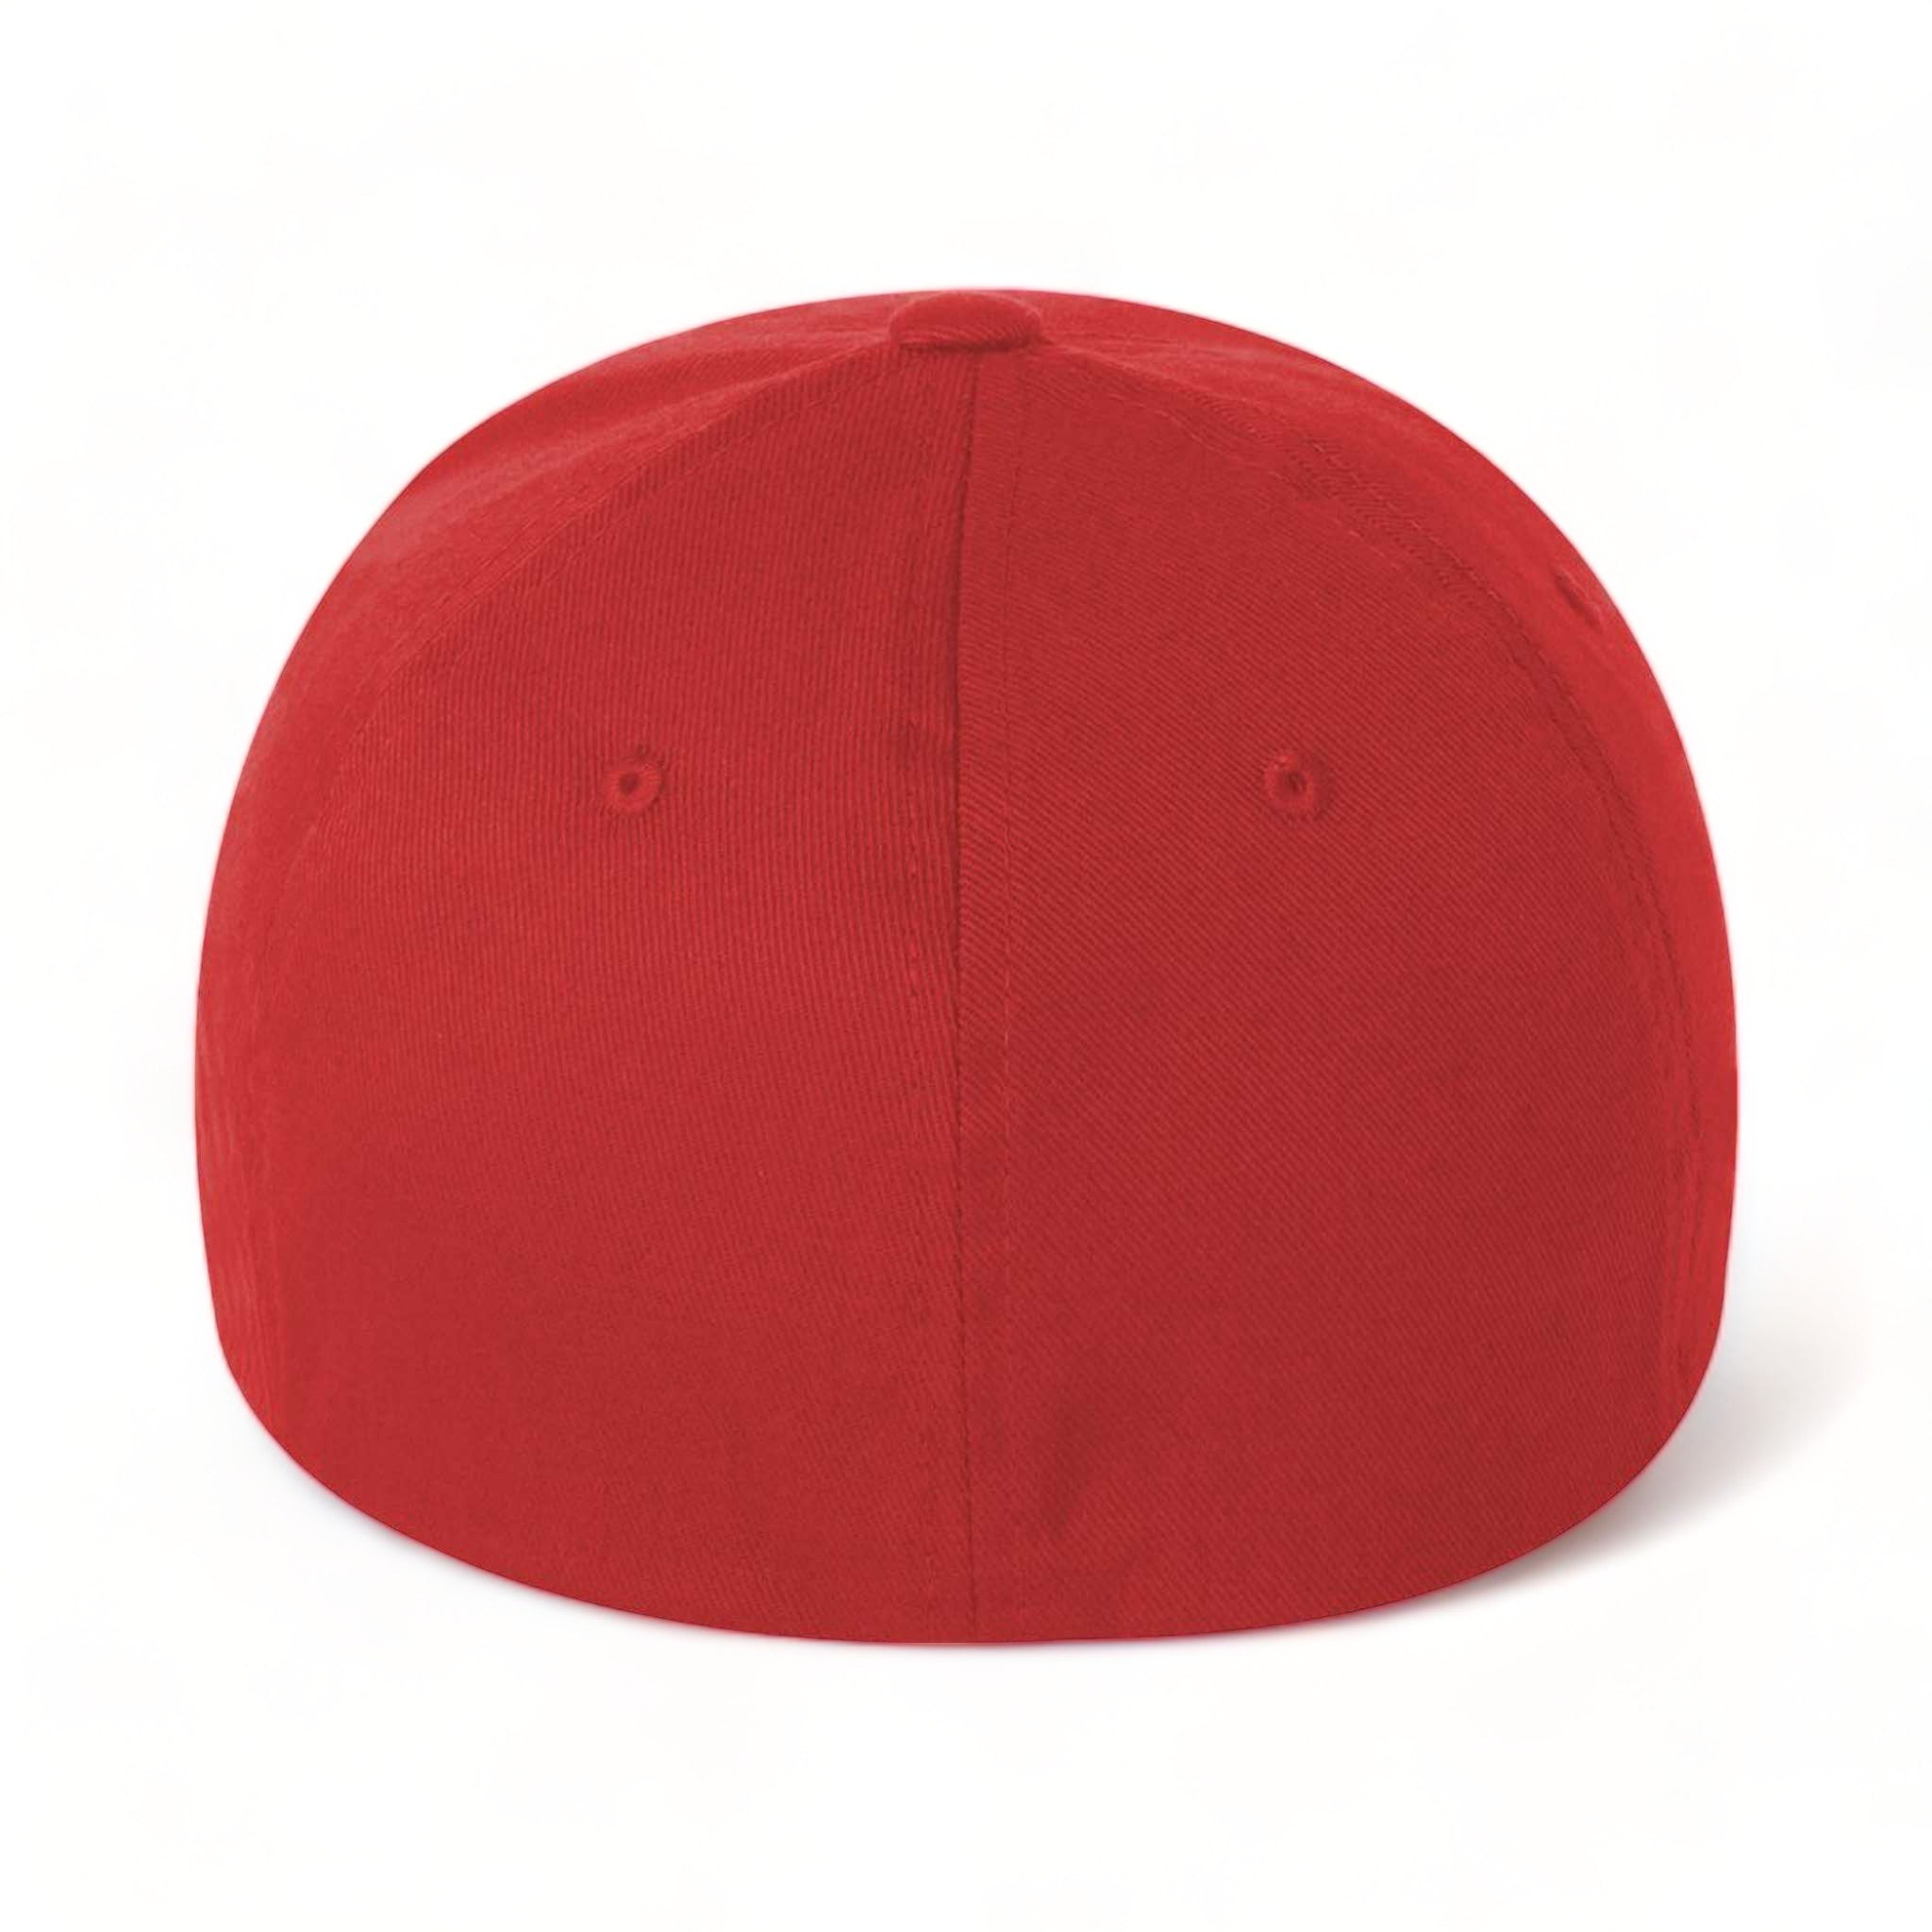 Back view of Flexfit 6277 custom hat in red